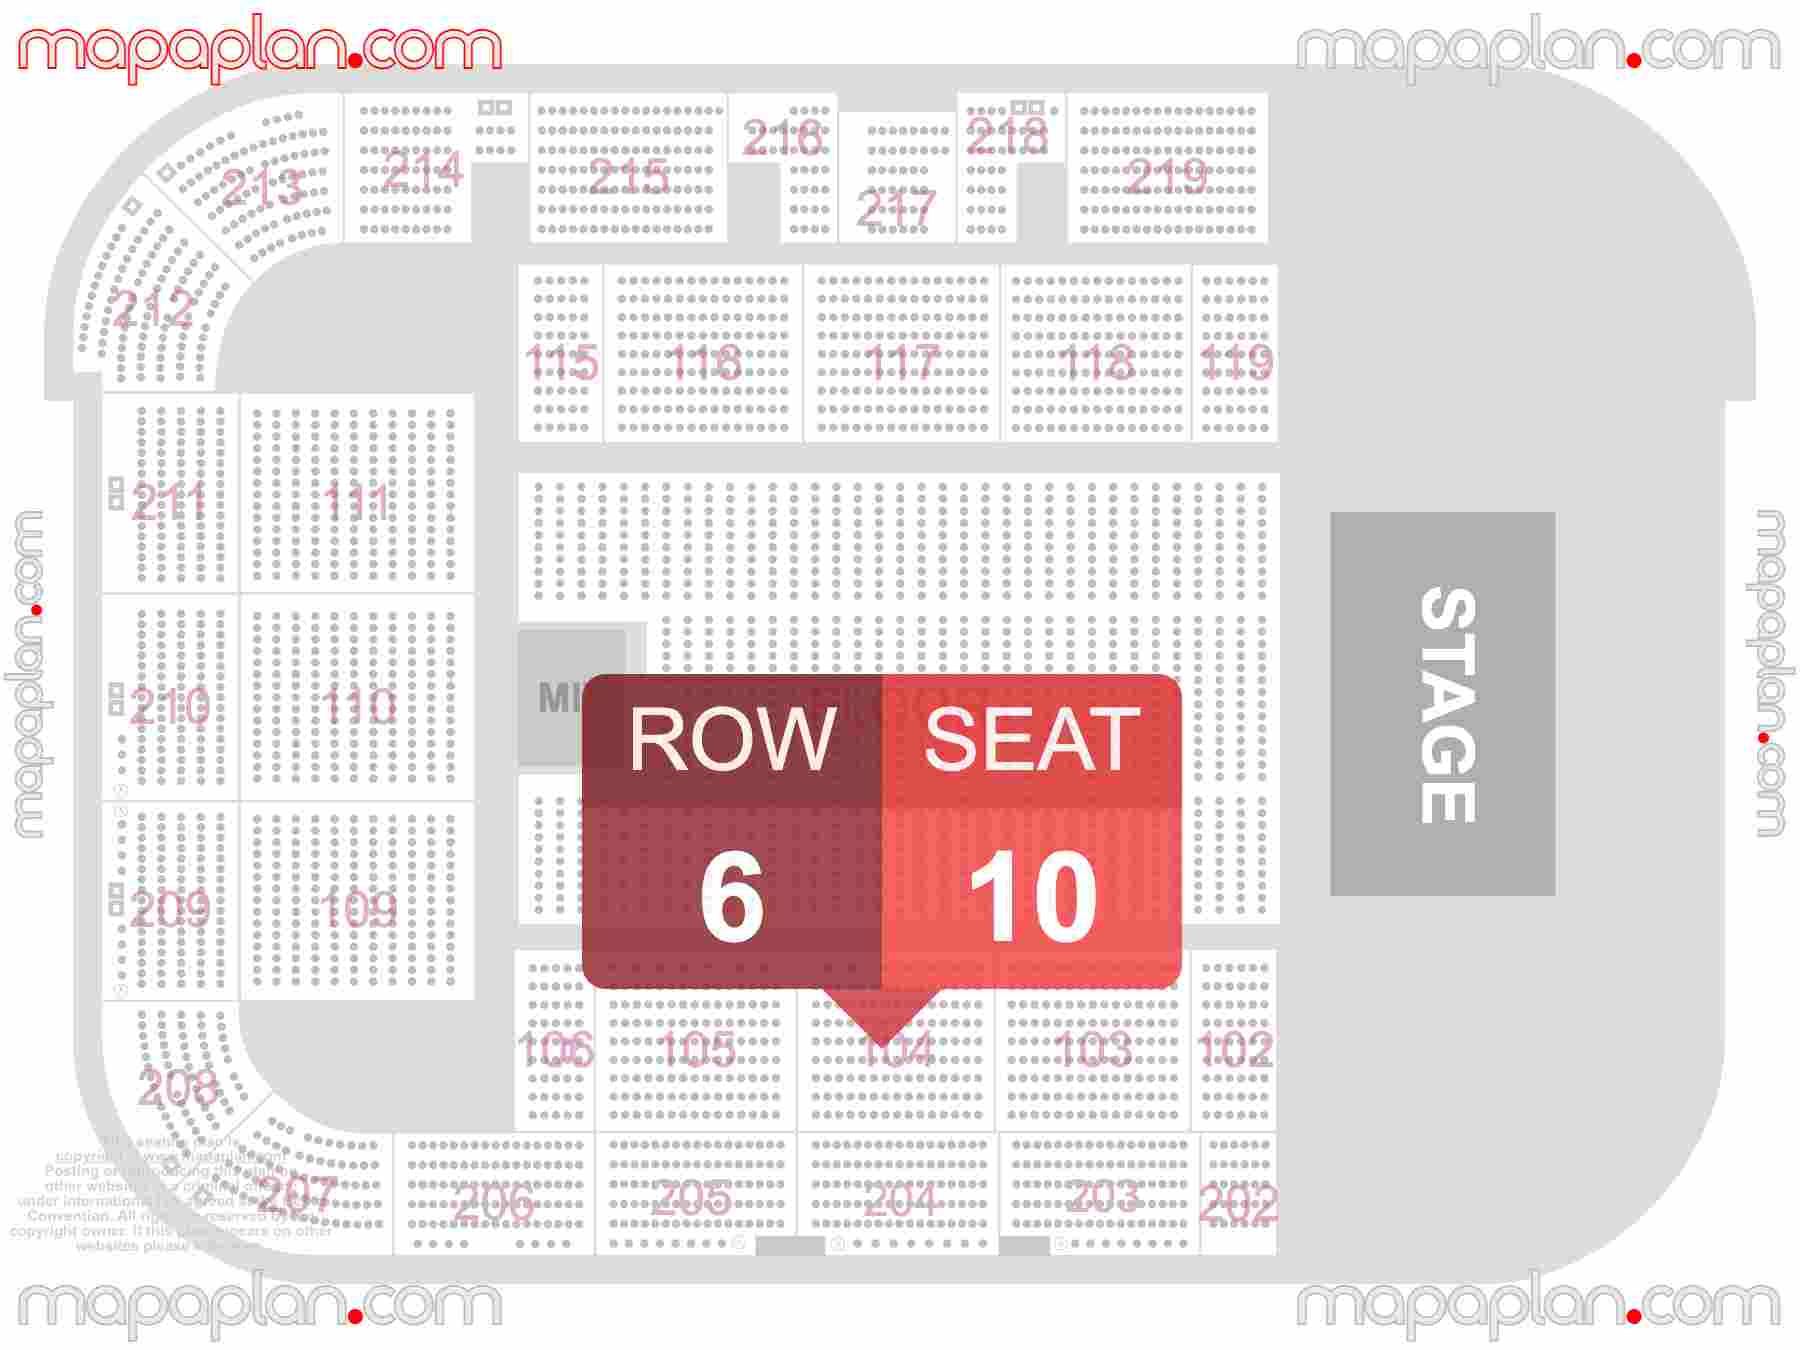 Perth HBF Stadium Superdrome seating map Concert detailed seat numbers and row numbering map with interactive map plan layout